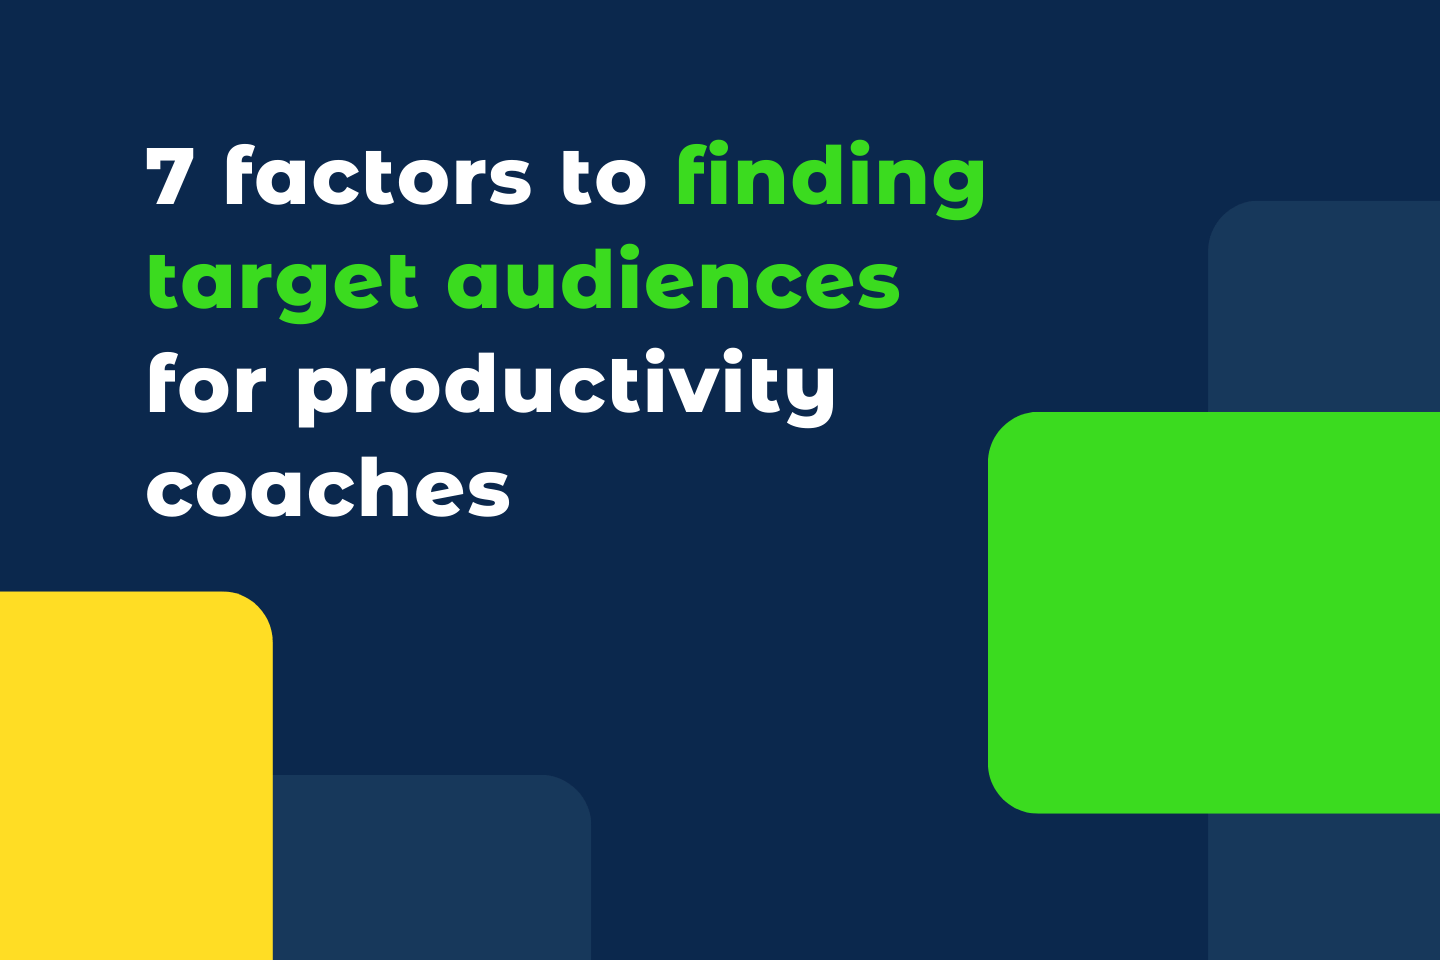 7 key factors to finding target audiences for productivity coaches